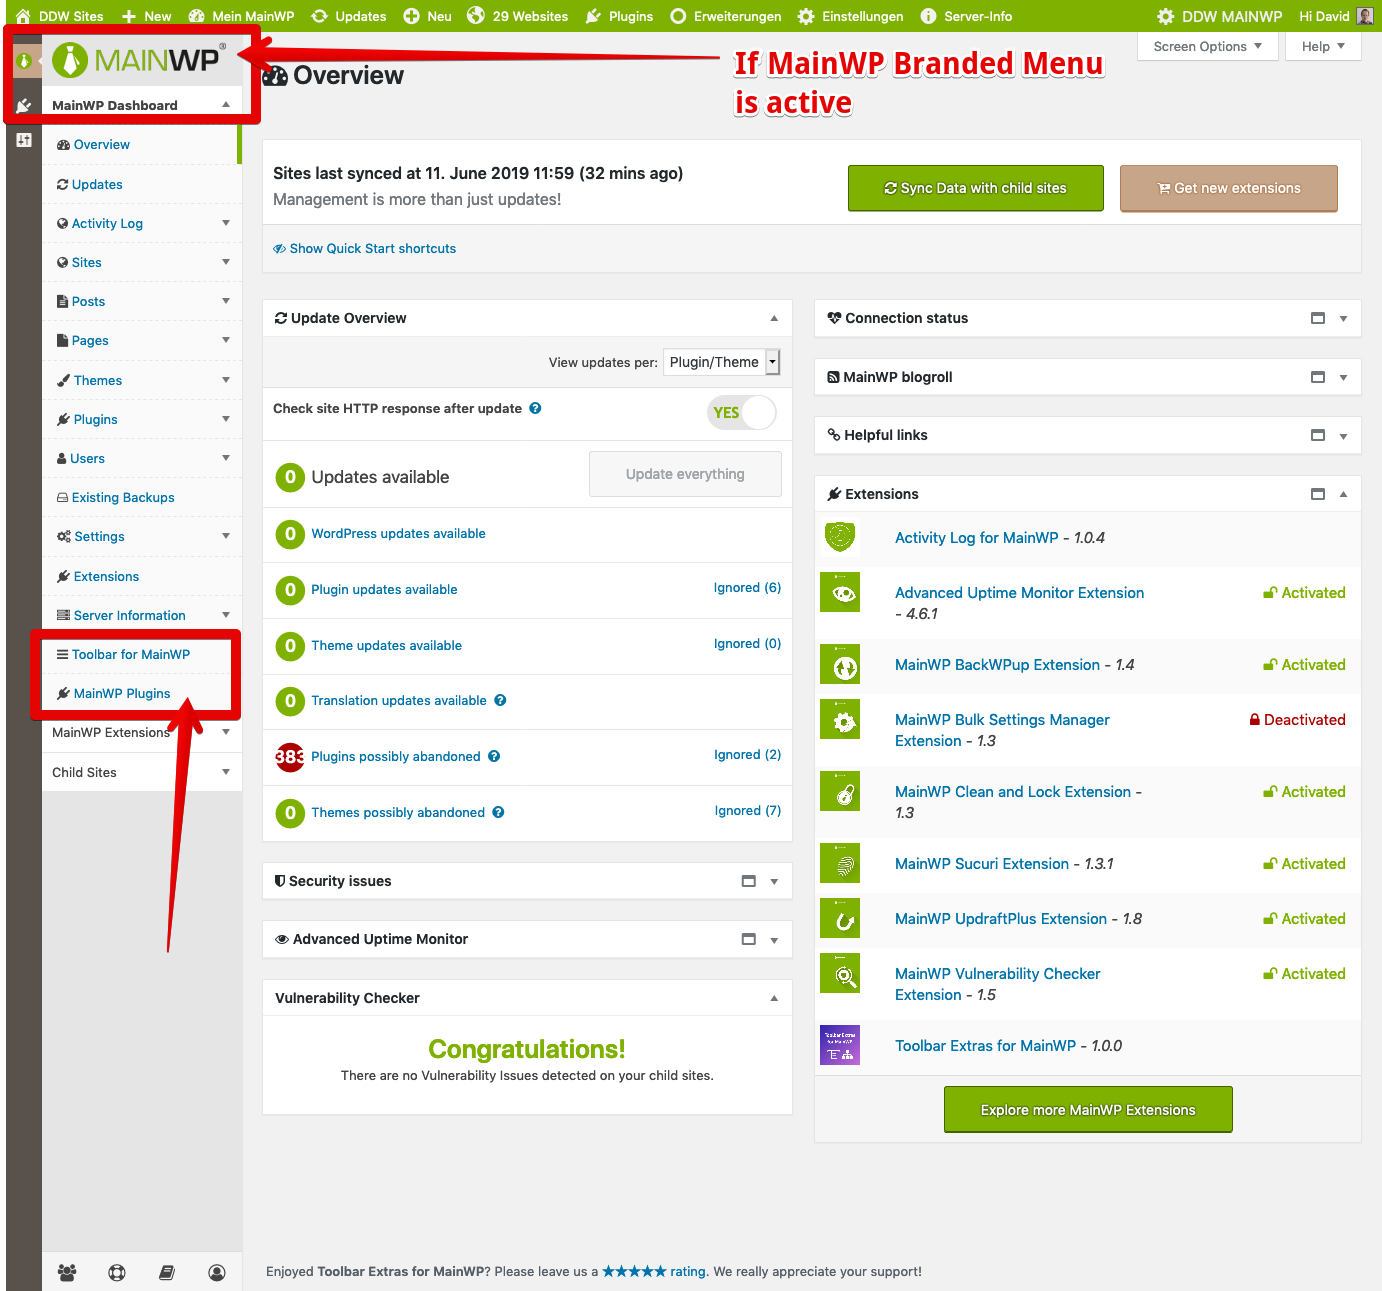 For MainWP Branded Admin Menü: additional Dashboard items